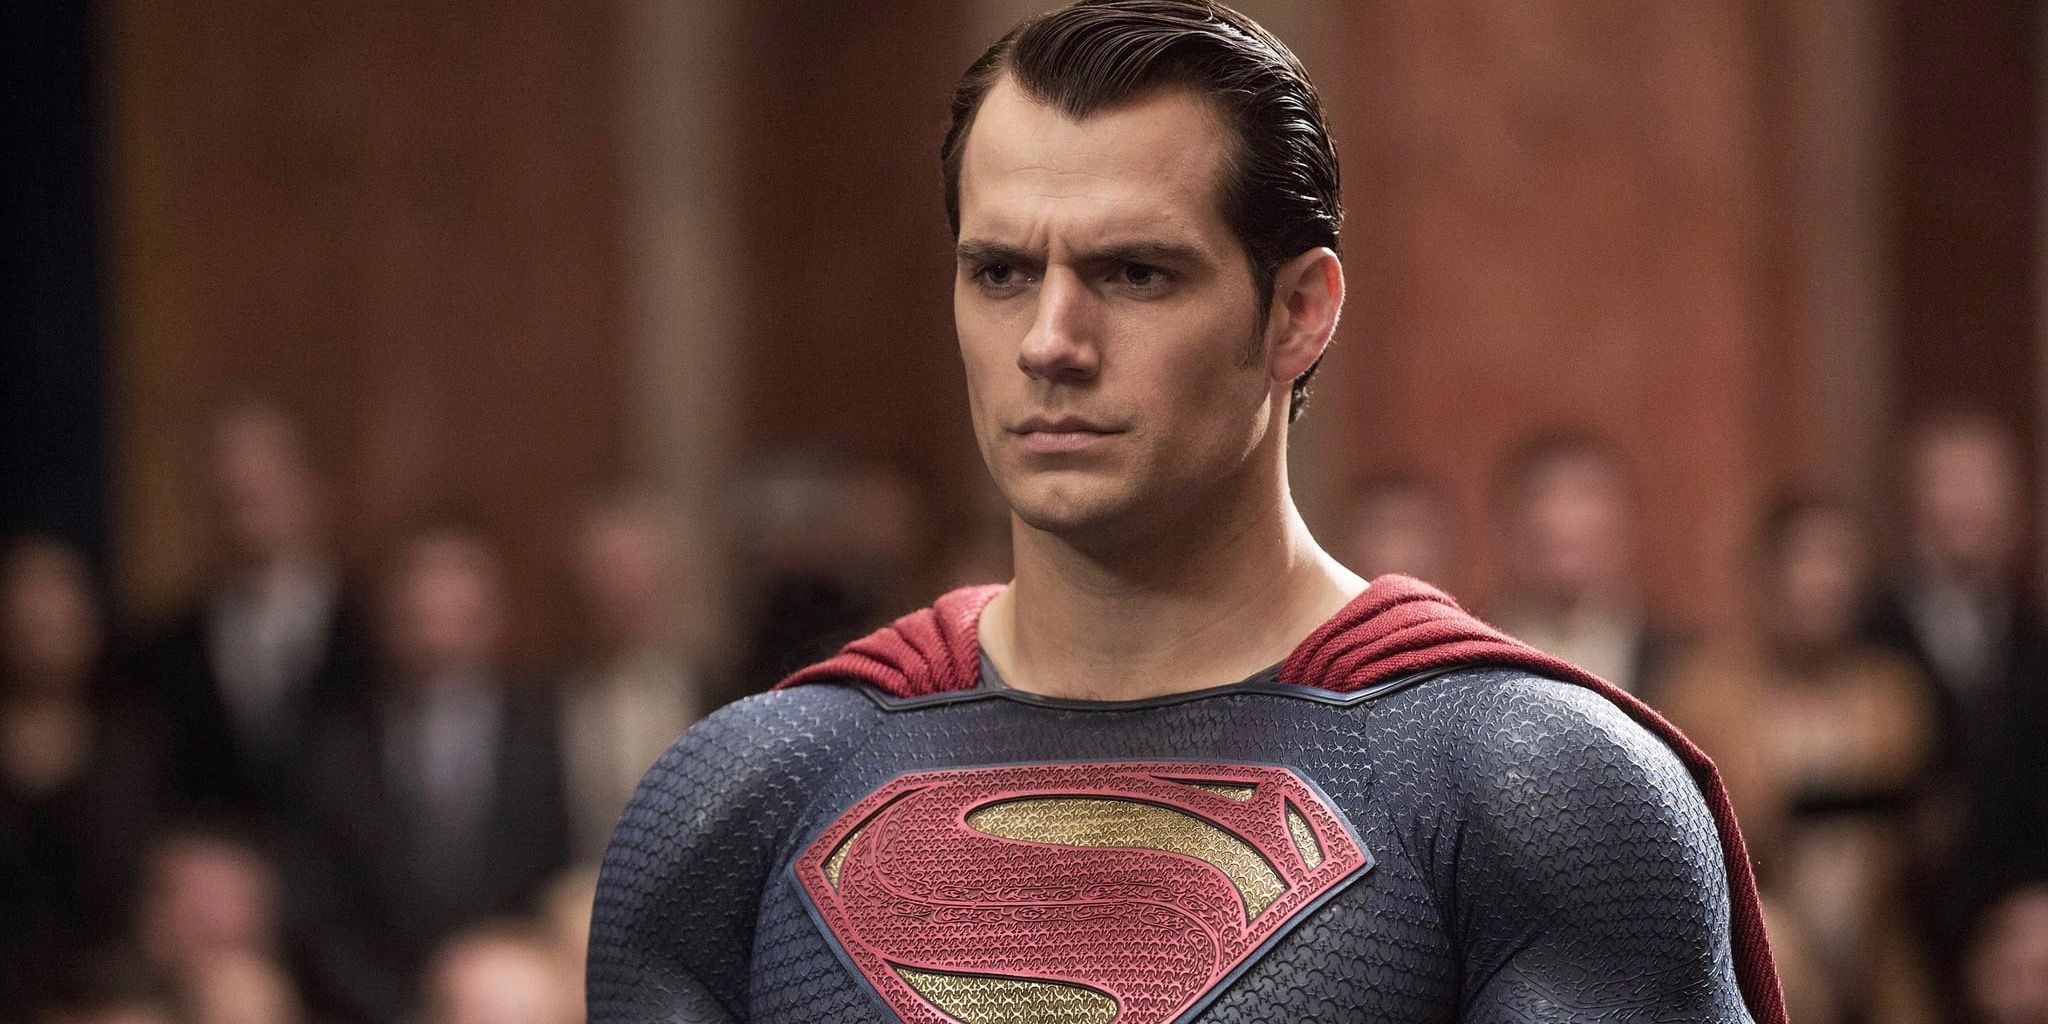 Superman stands in a court room in Batman vs. Superman